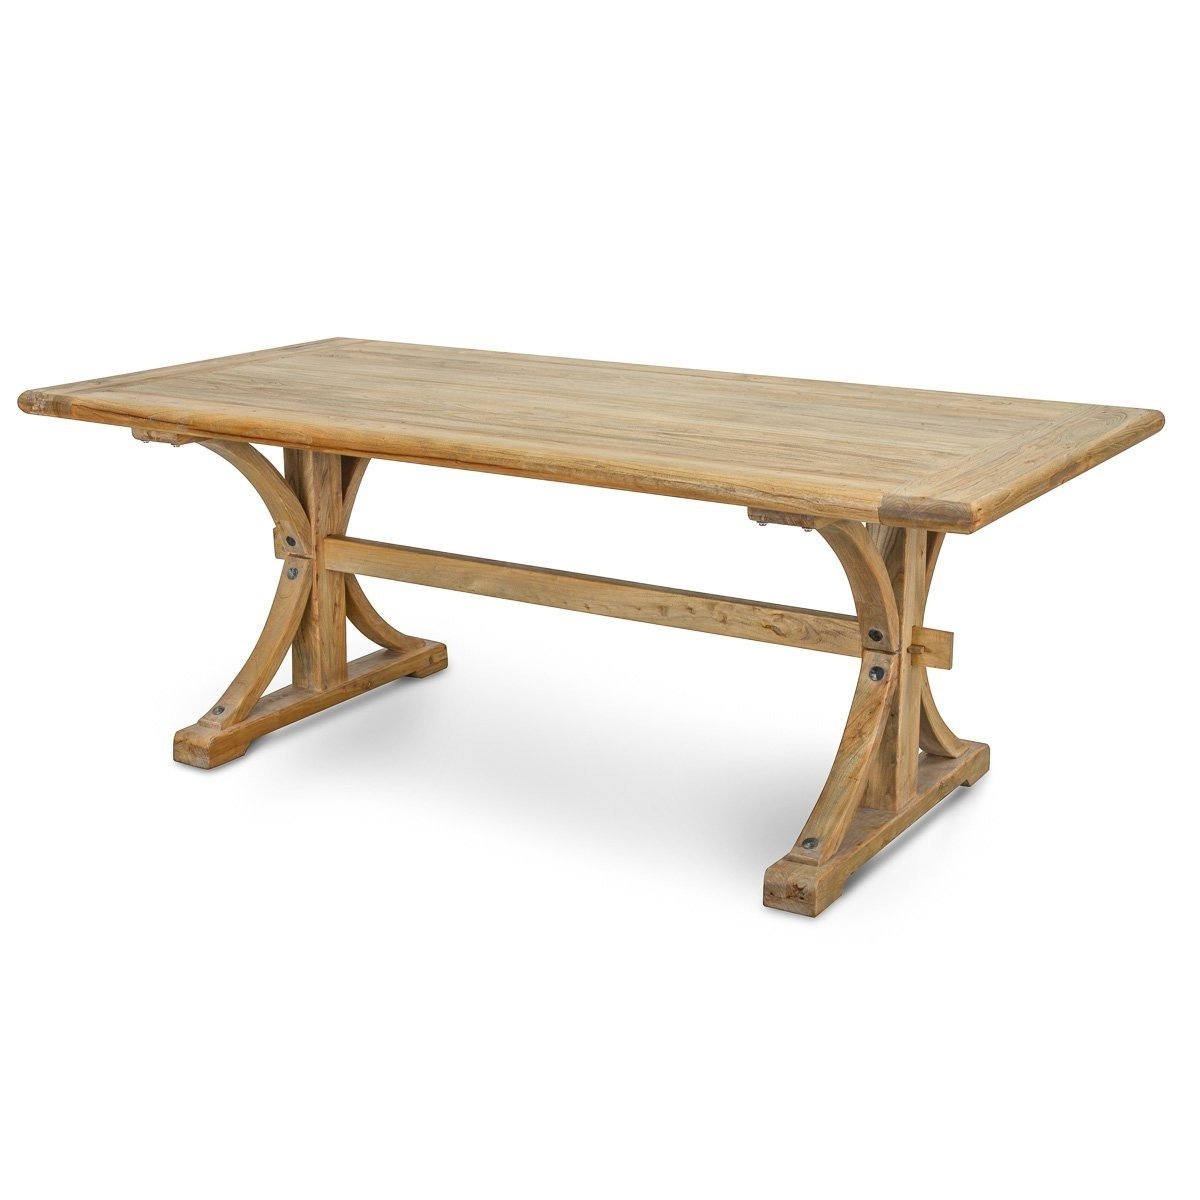 Alba Reclaimed Elm Wood Dining Table 2M - Natural - Dining Tables